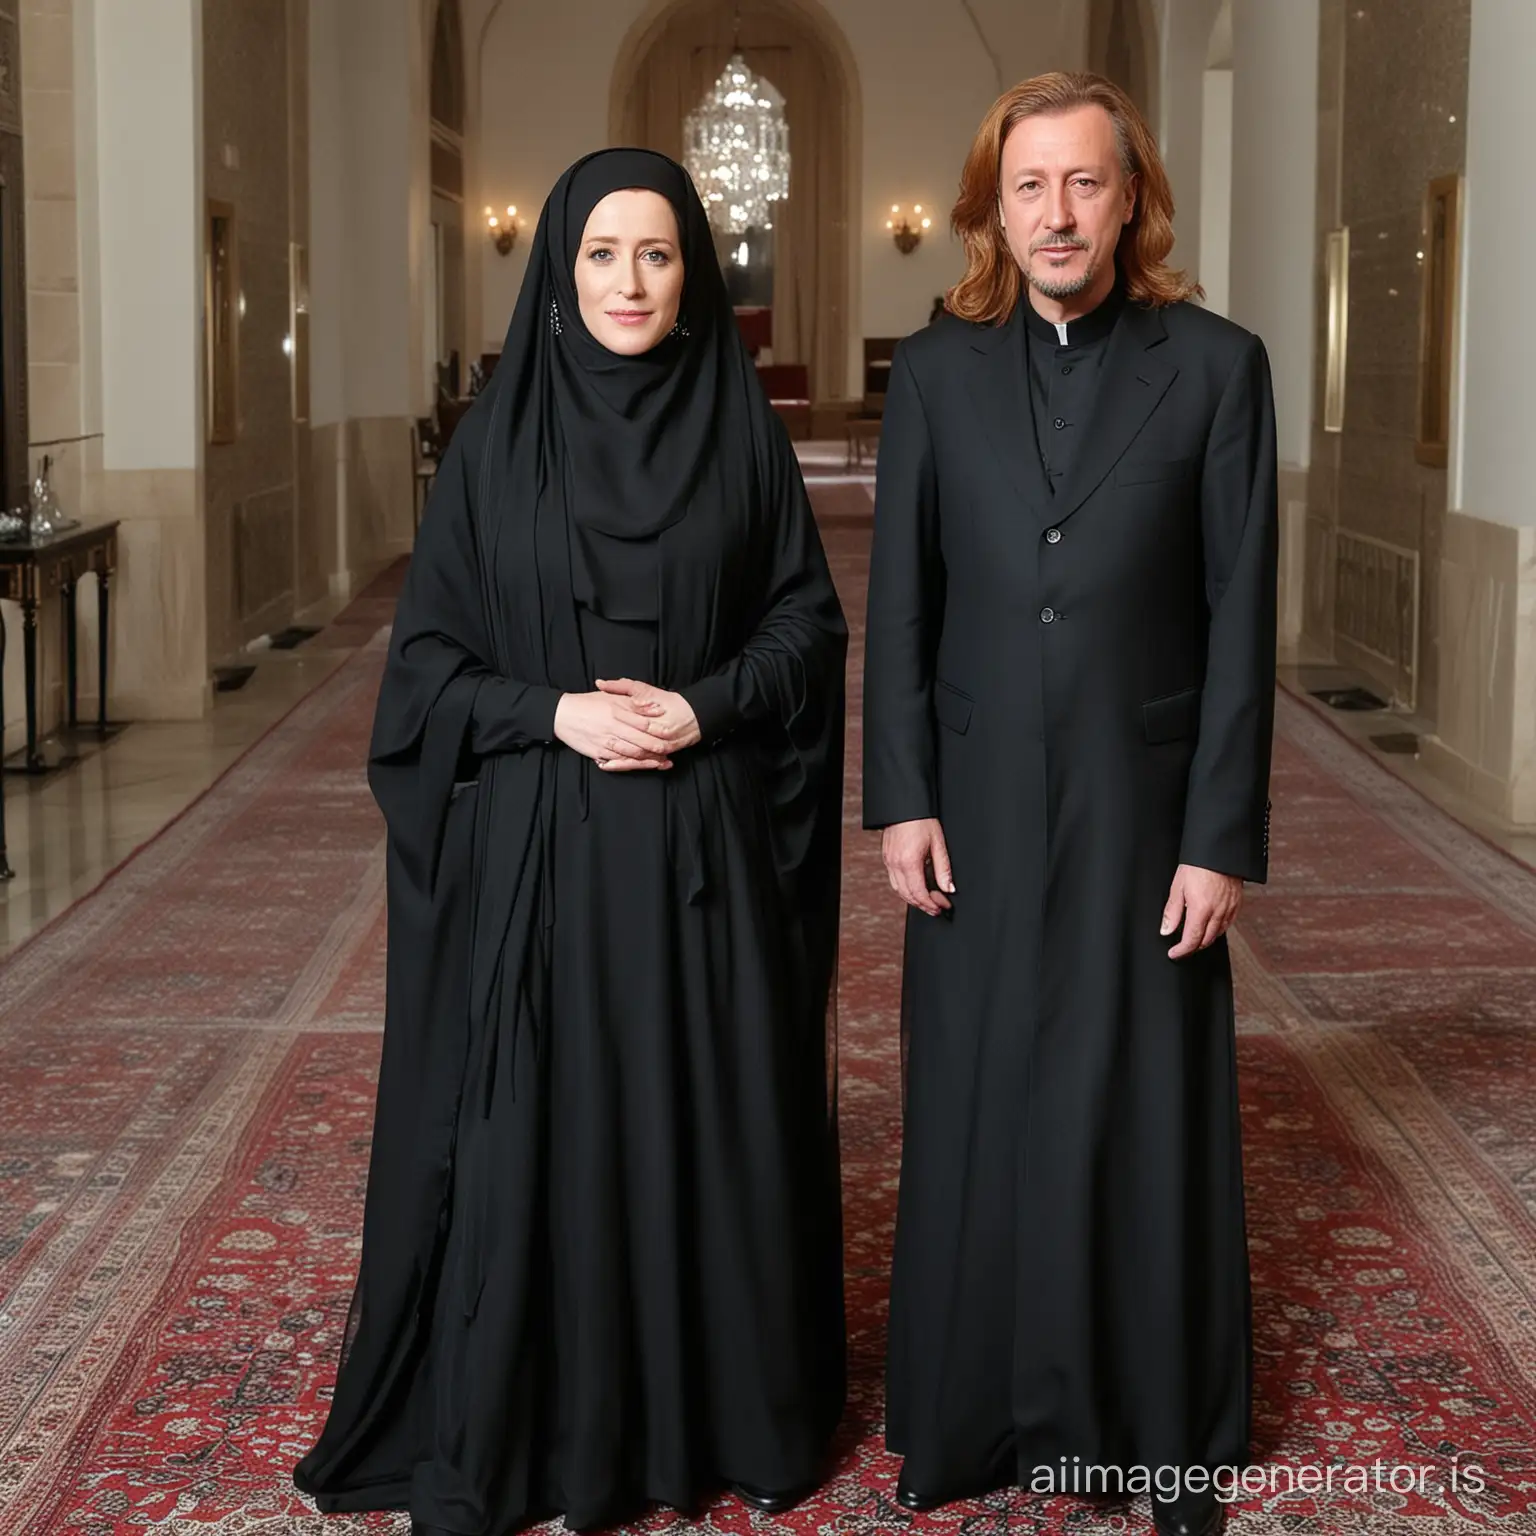 red haired Gillian Anderson with President Erdogan, he asked Gillian to dress accordingly to his Muslim faith and wear a floor-length black abaya with long black hijab and stand demurely beside him as  his newlywed devoted loving wife